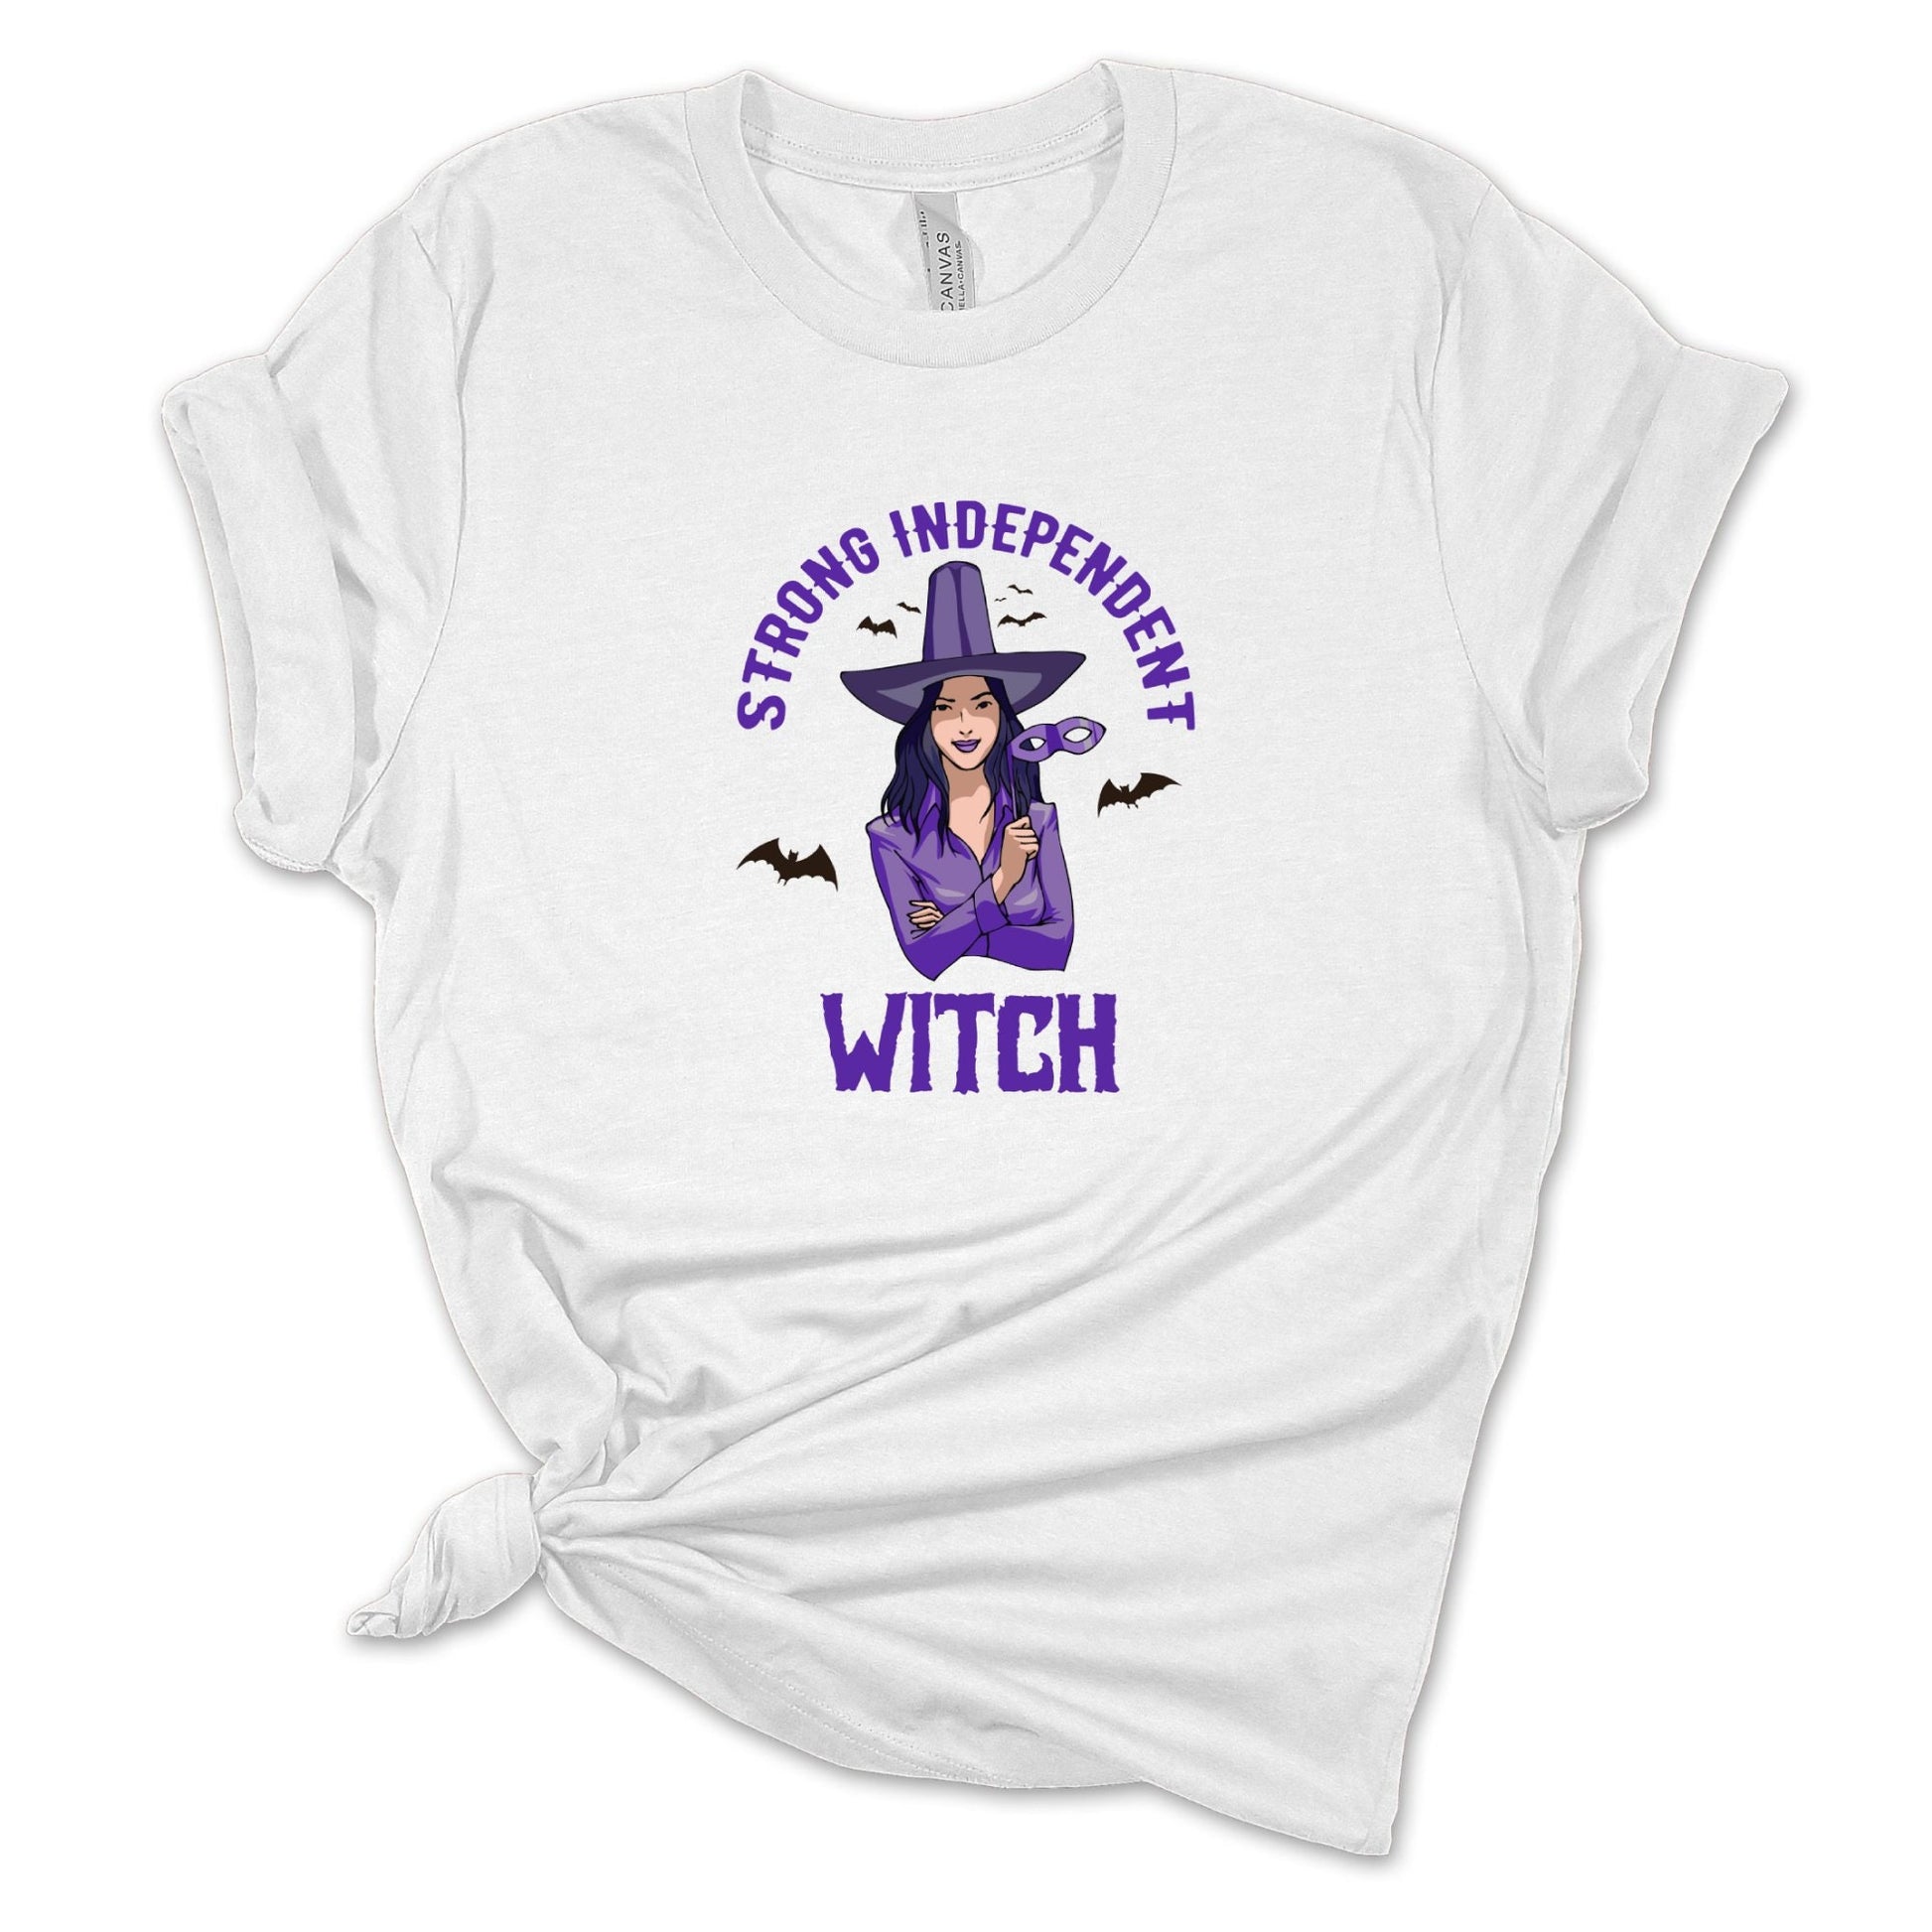 Strong Independent Witch T-Shirt, Witches Shirt, Halloween Tee, Witch Shirt, Occult Shirt, Unisex Tee